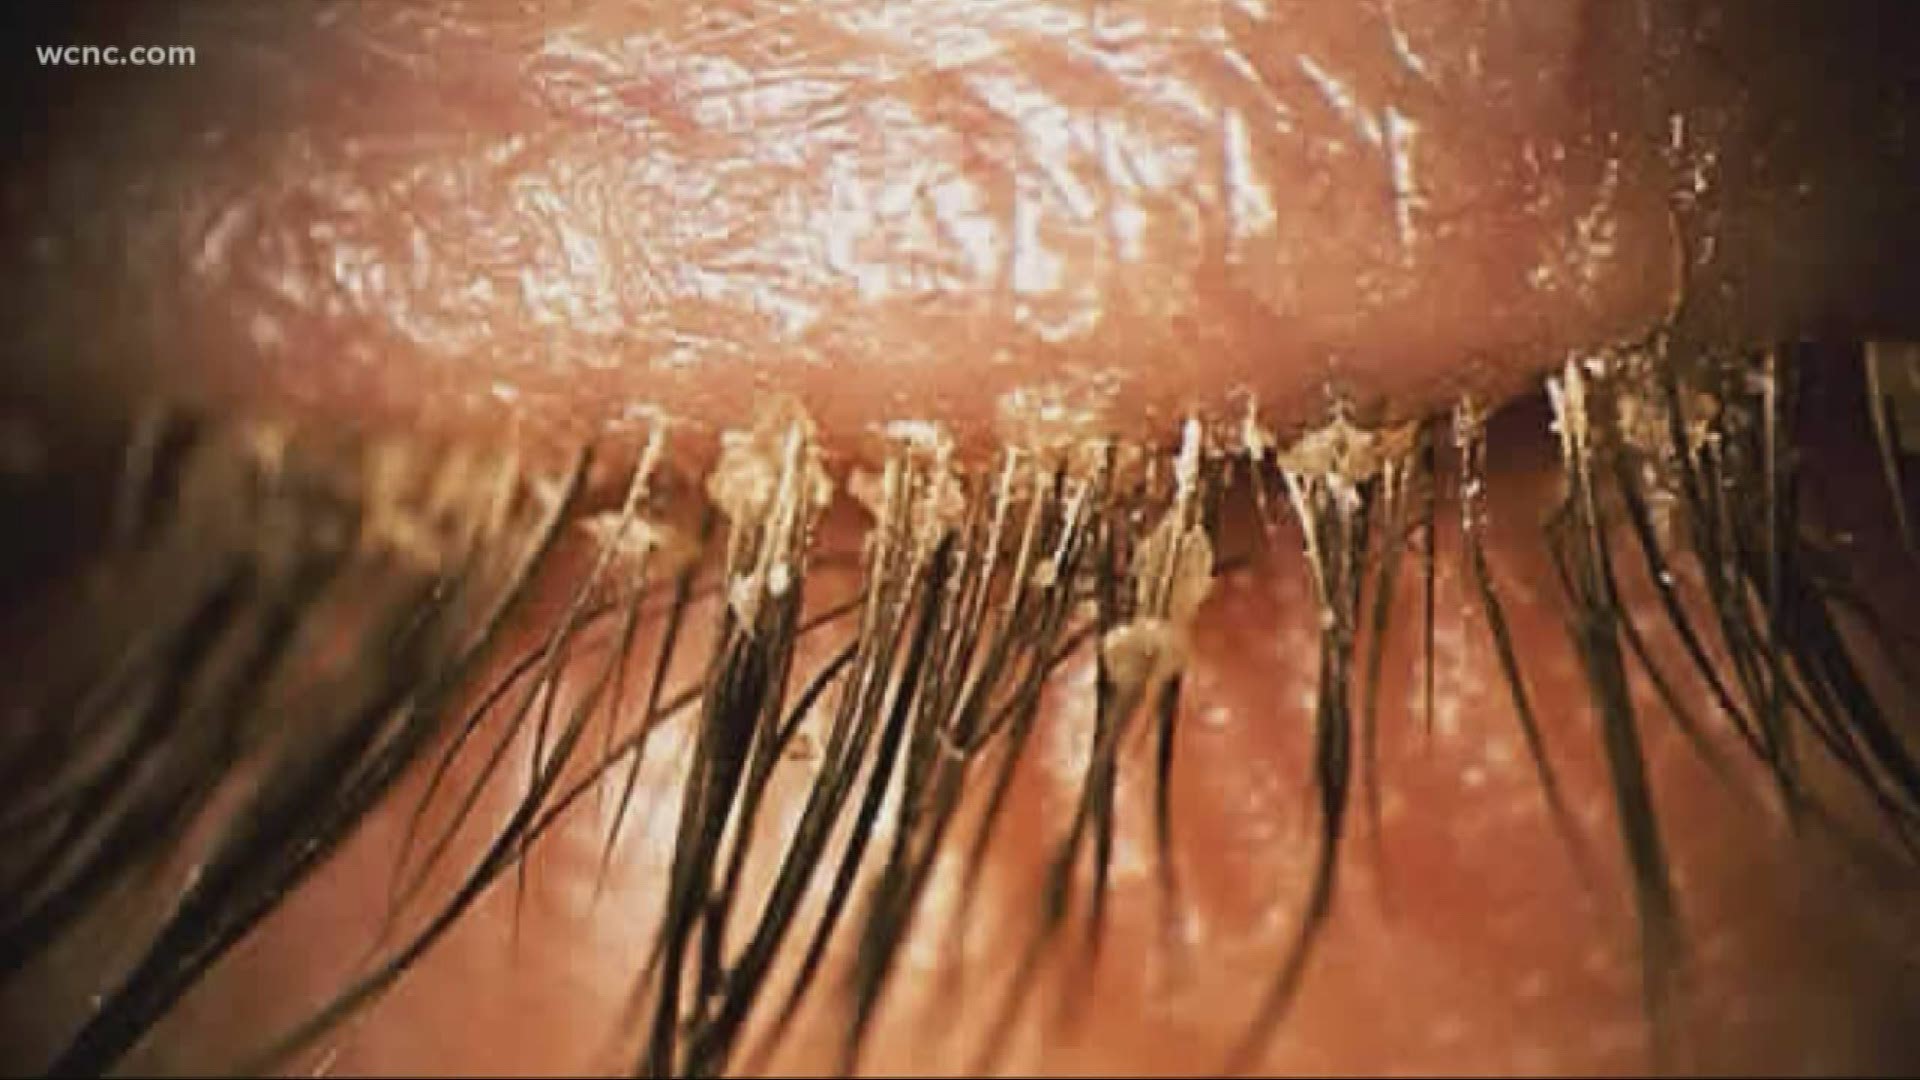 Many women are getting eyelash extensions from technicians that apply lash by lash. But now, some optometrists say they're seeing an increase of tiny mites.